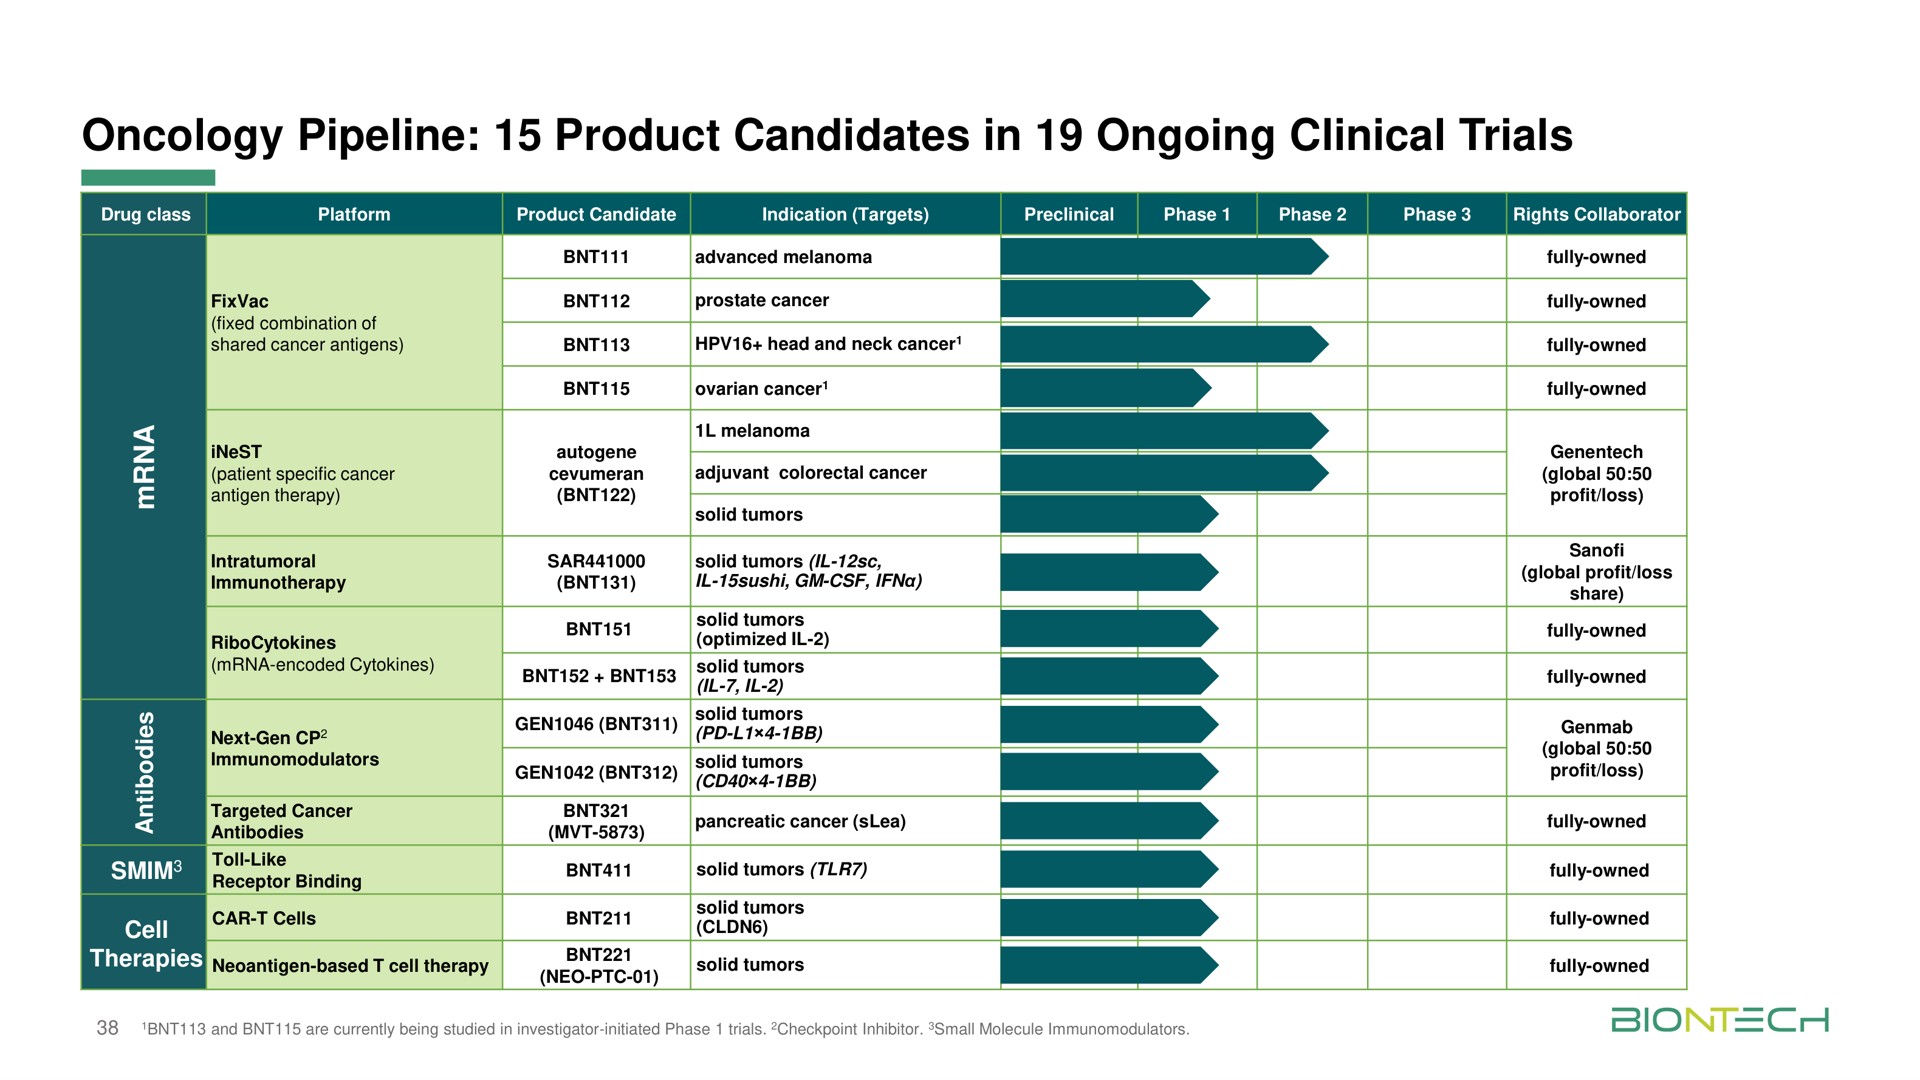 oncology pipeline product candidates in ongoing clinical trials | BioNTech